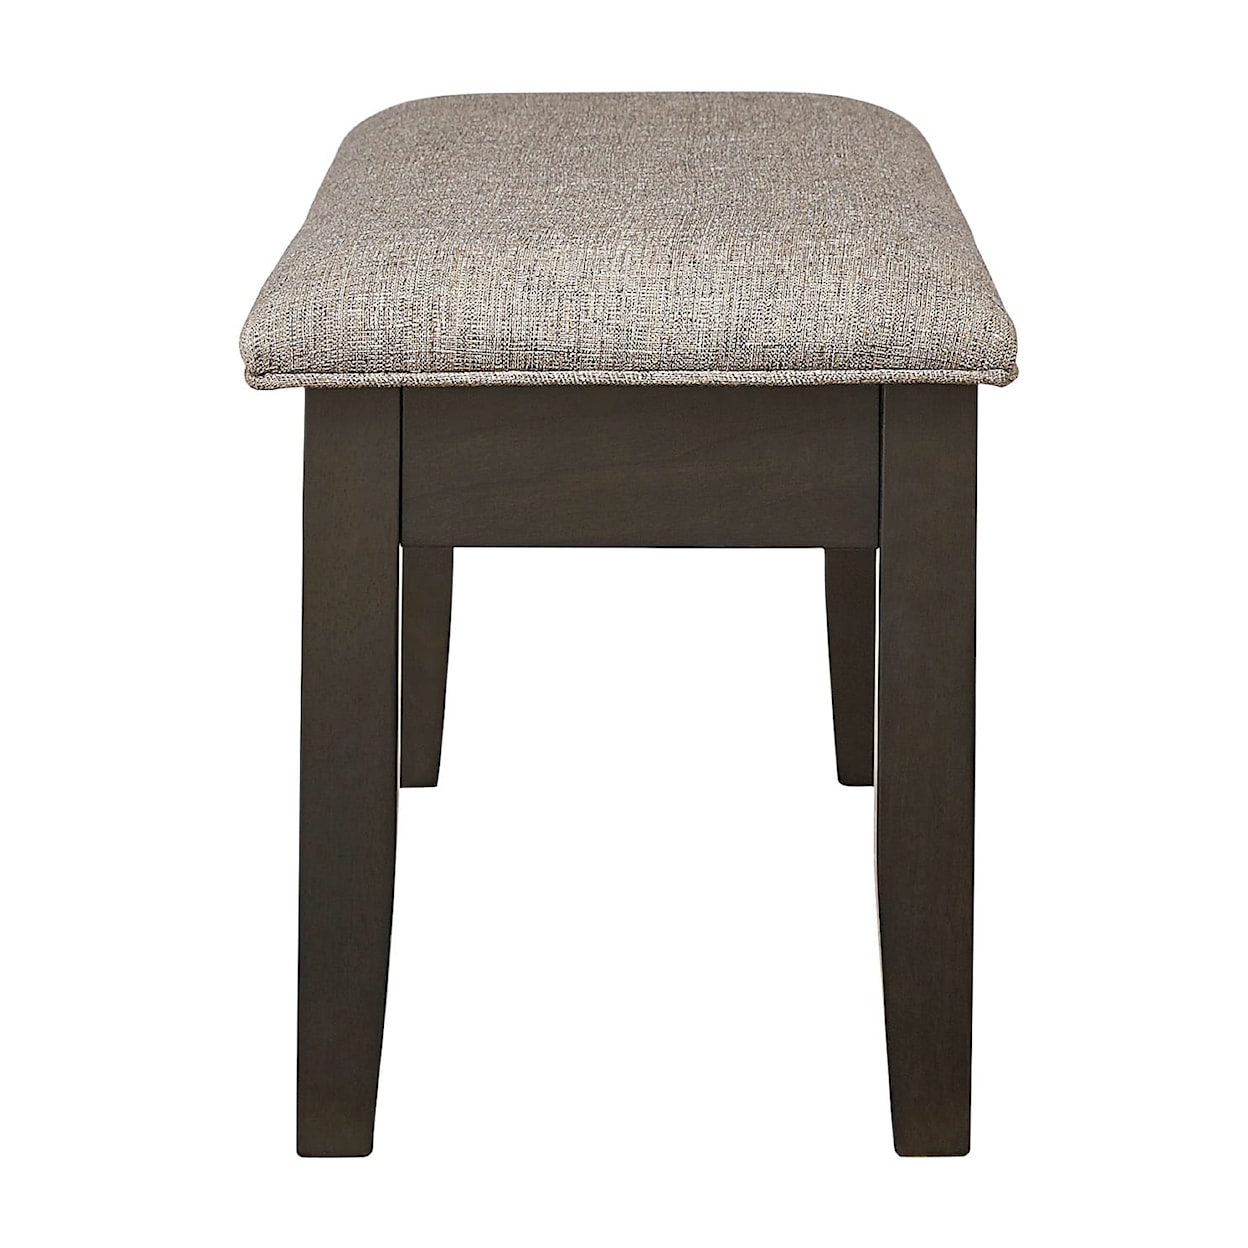 Signature Design by Ashley Ambenrock Upholstered Dining Bench with Storage